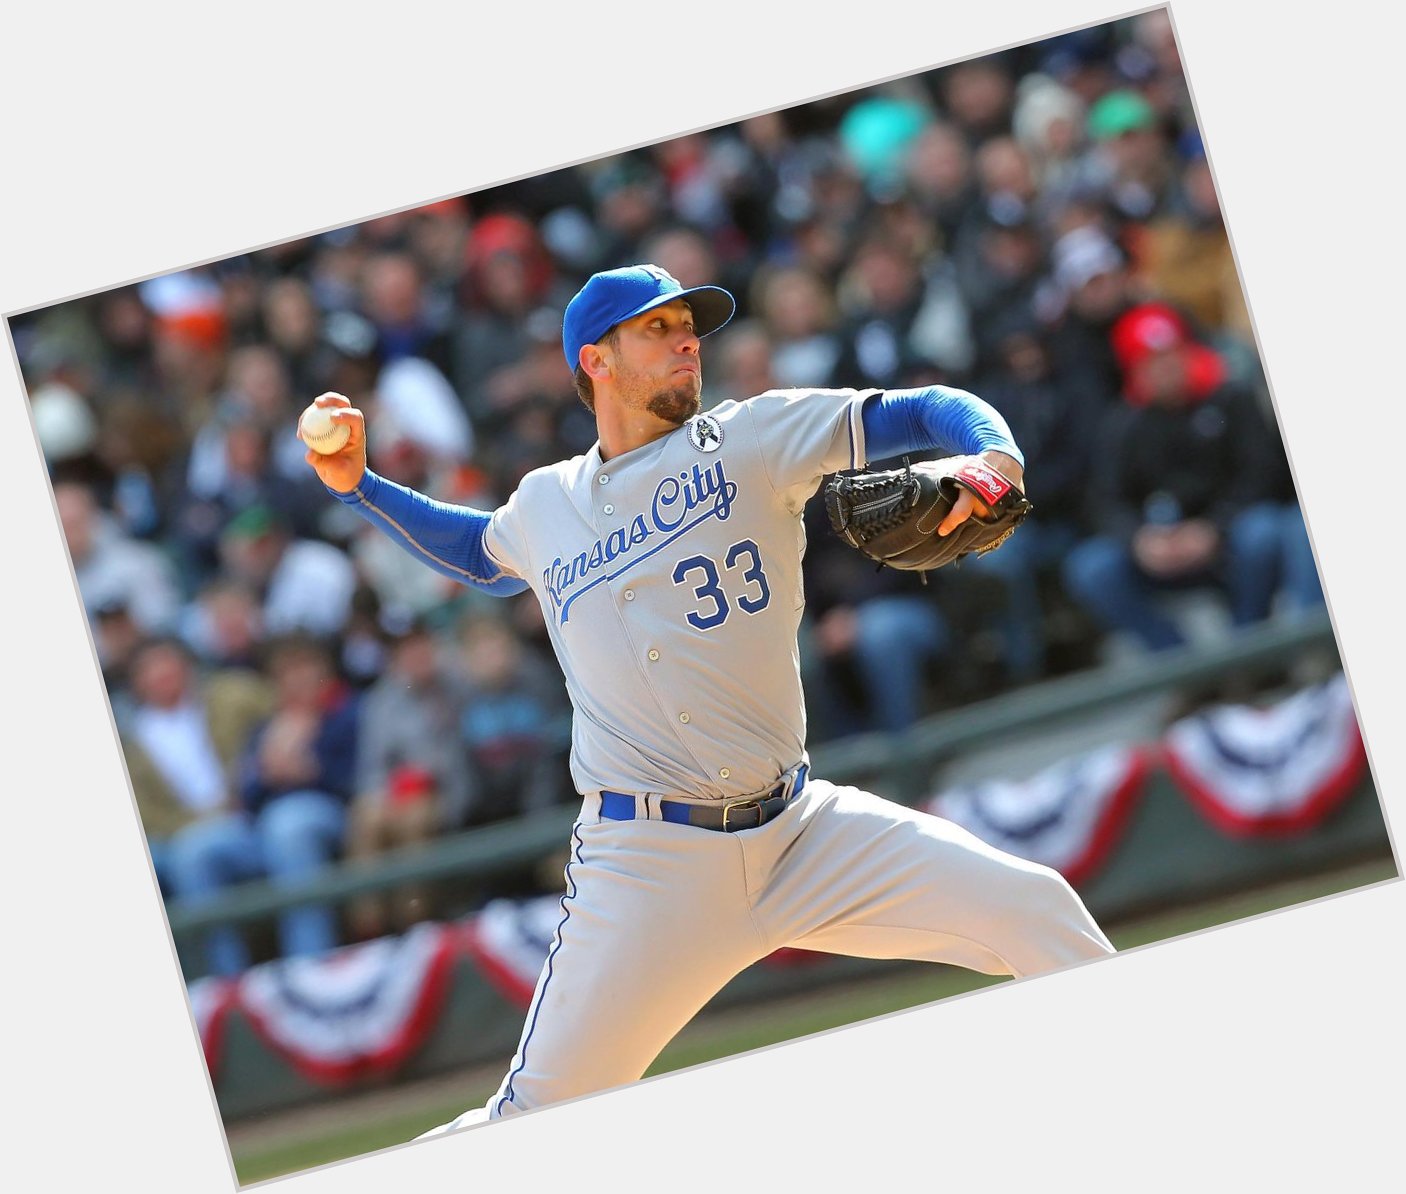 Happy Birthday to James Shields, who turns 33 today! 